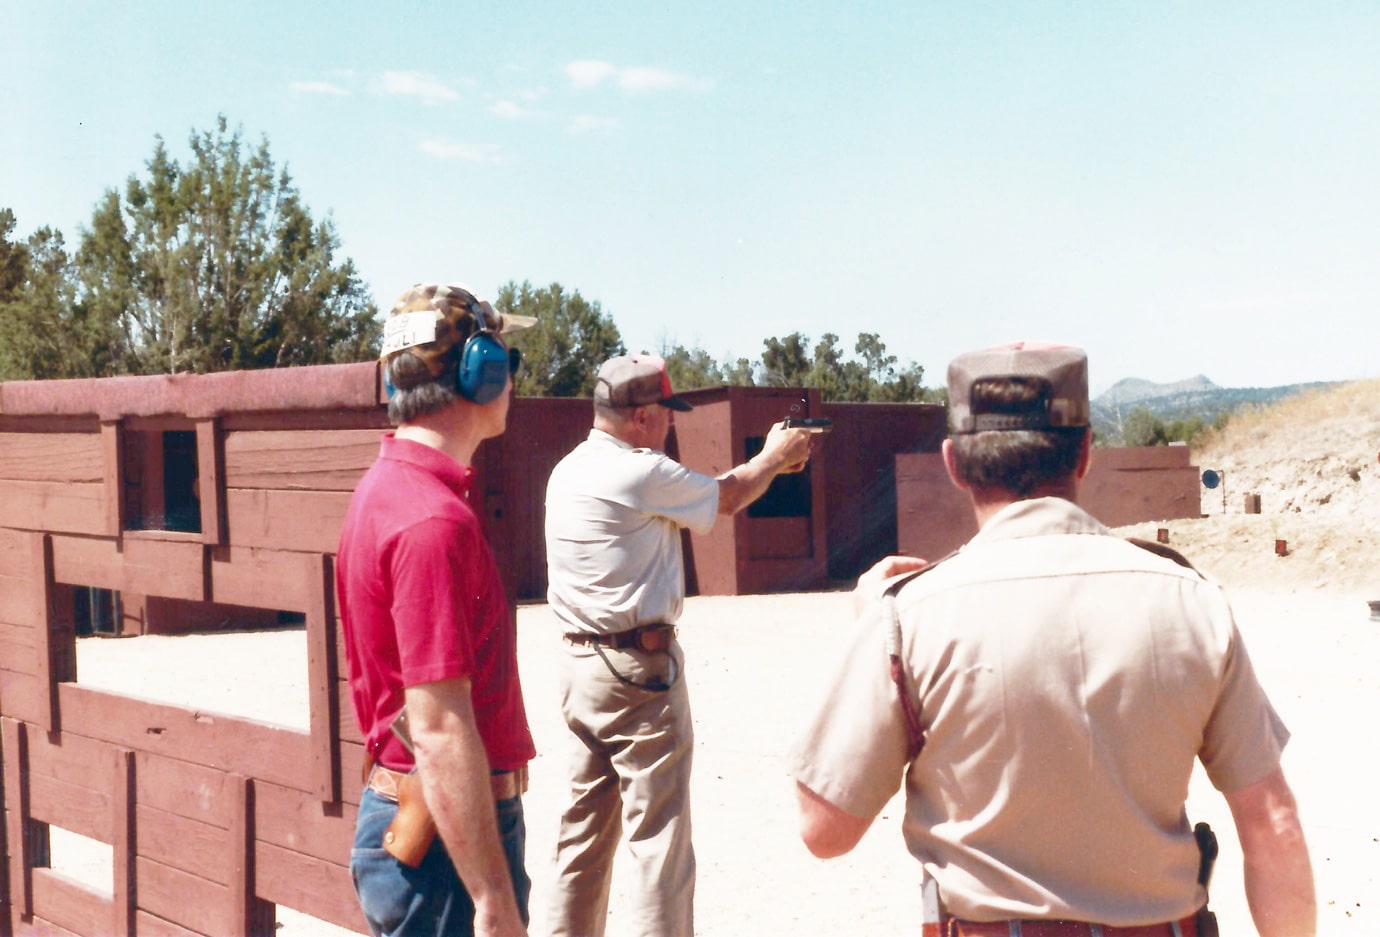 jeff cooper demonstrating how to shoot a pistol